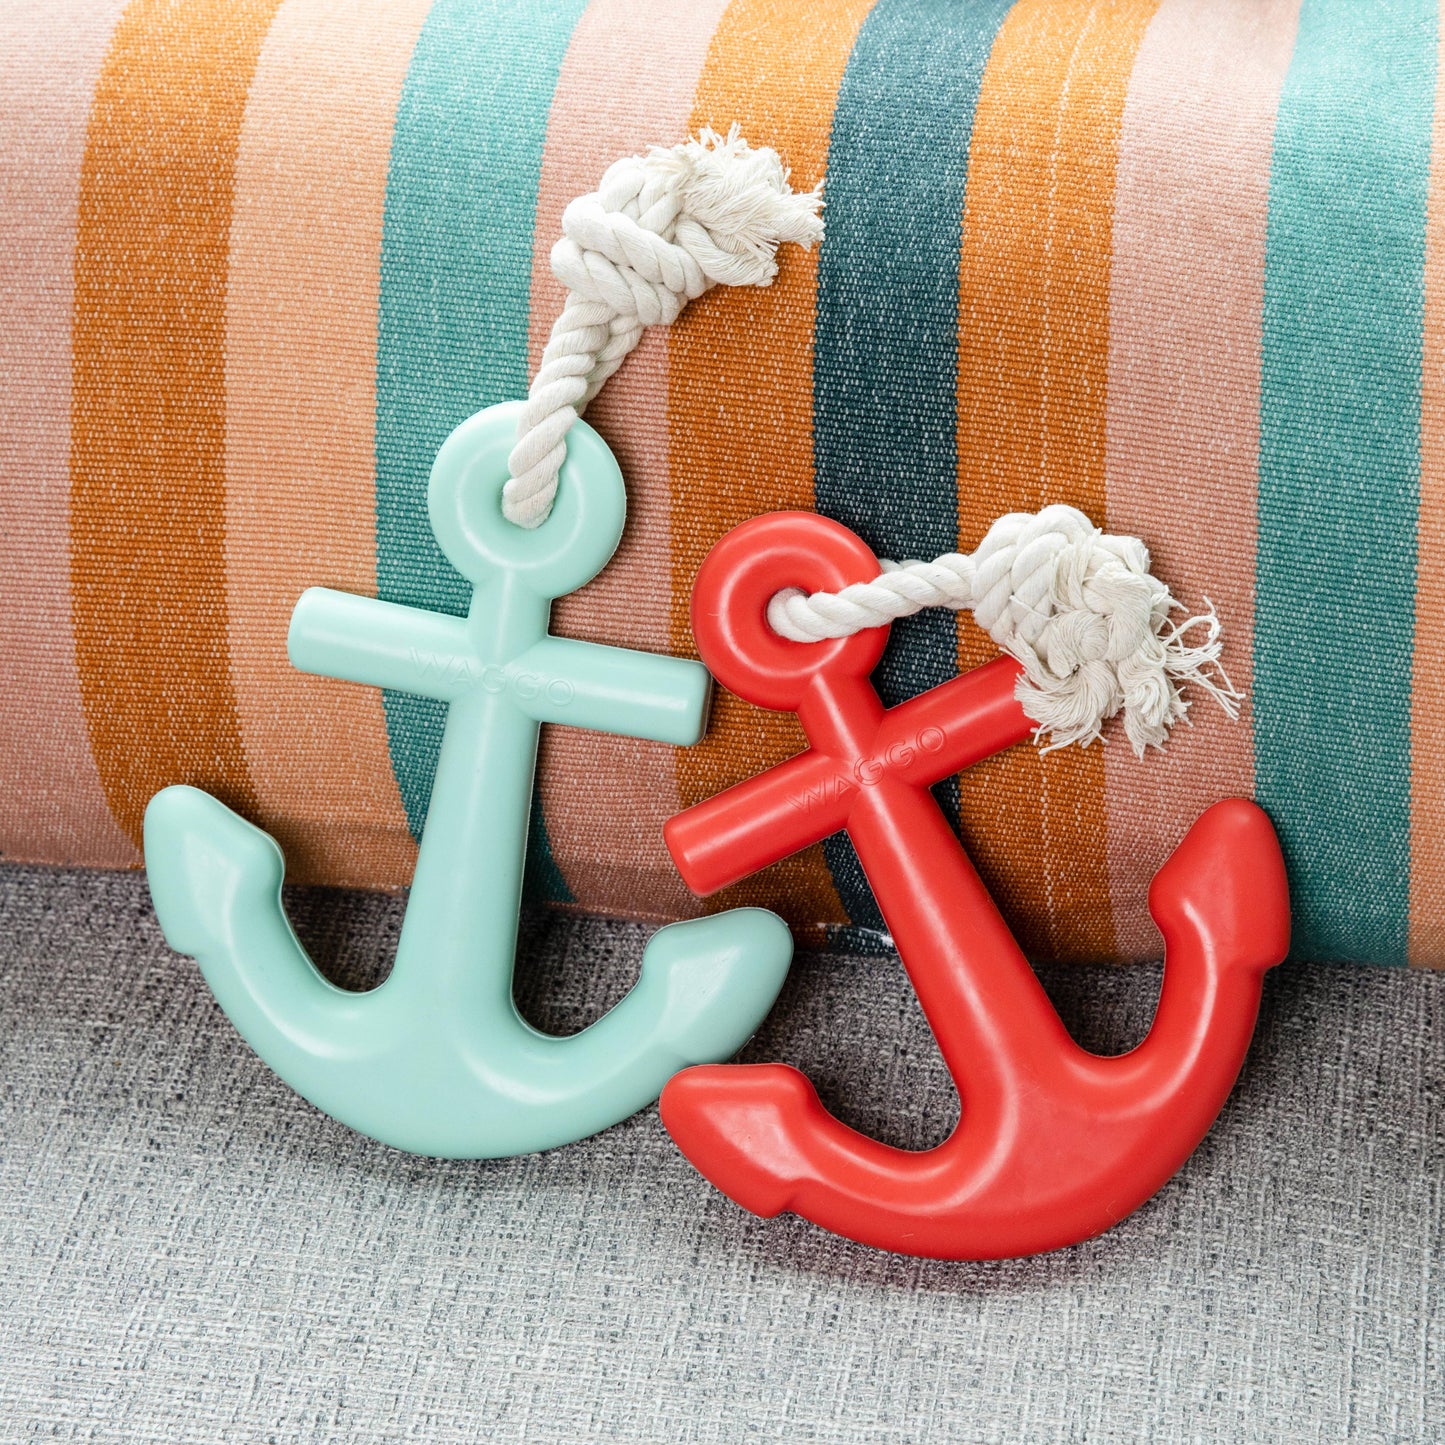 Anchors Aweigh Rubber Dog Toy: Navy / Large